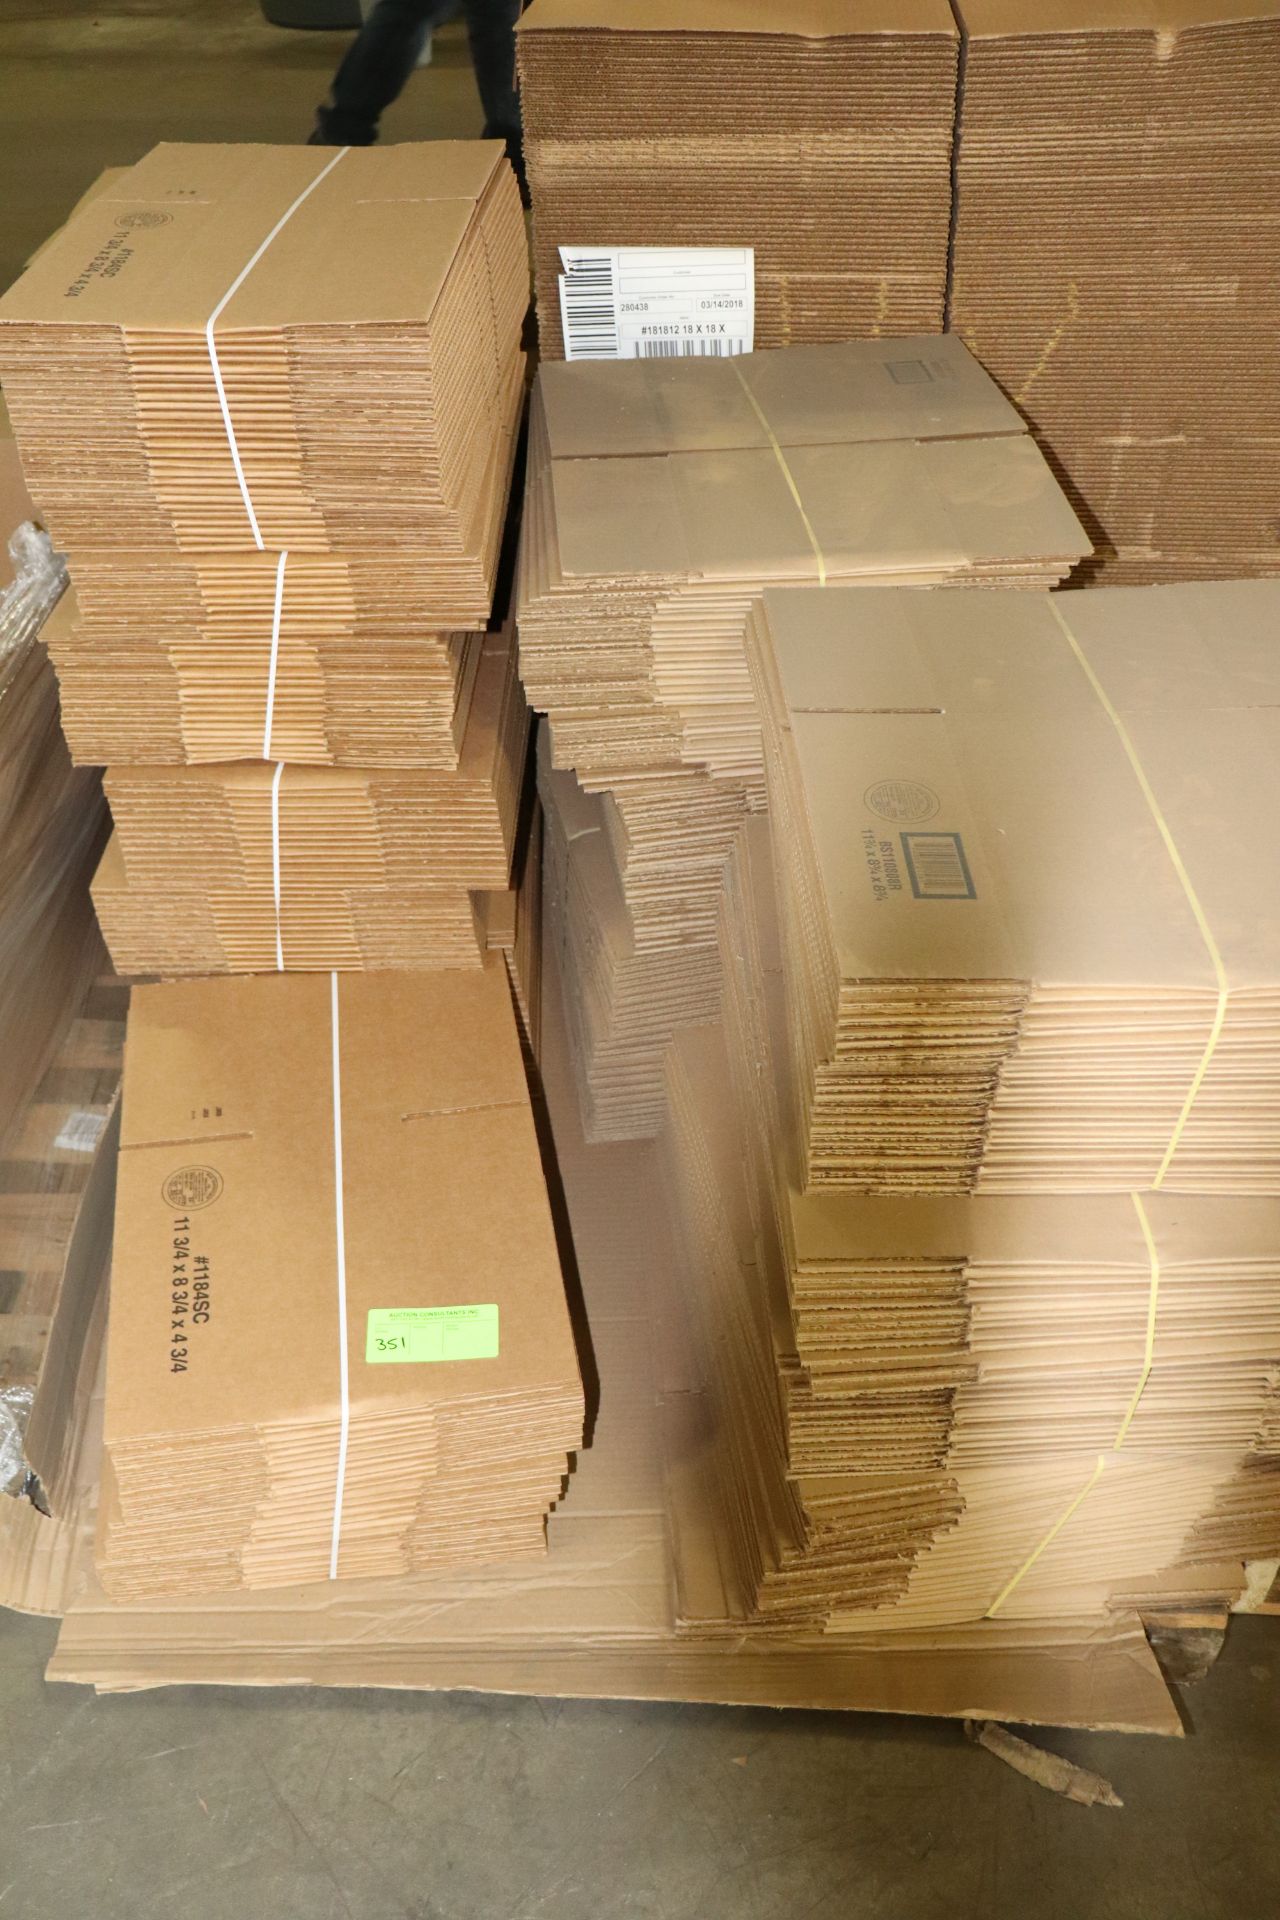 Pallet of boxes, 11-3/4" x 8-3/4" x 8-3/4" and 11-3/4" x 8-3/4" x 4-3/4"